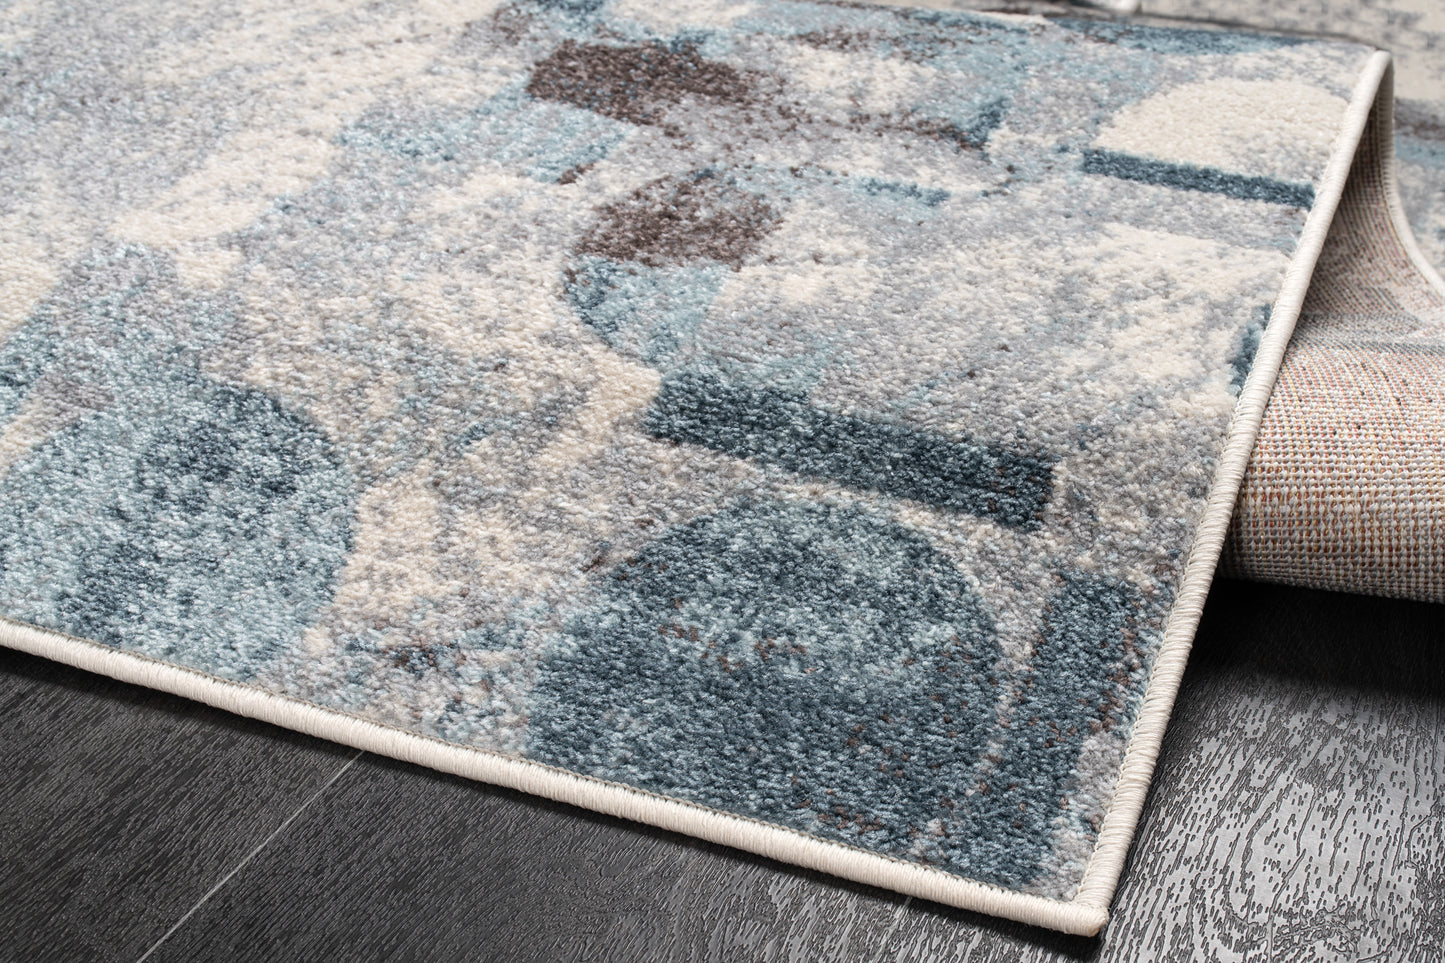 LaDole Rugs Abstract Rustic Modern Contemporary Area Rug - Premium Durable Carpet for Living Room, Bedroom, Office, Entrance, and Hallway - Blue, Brown, and Ivory